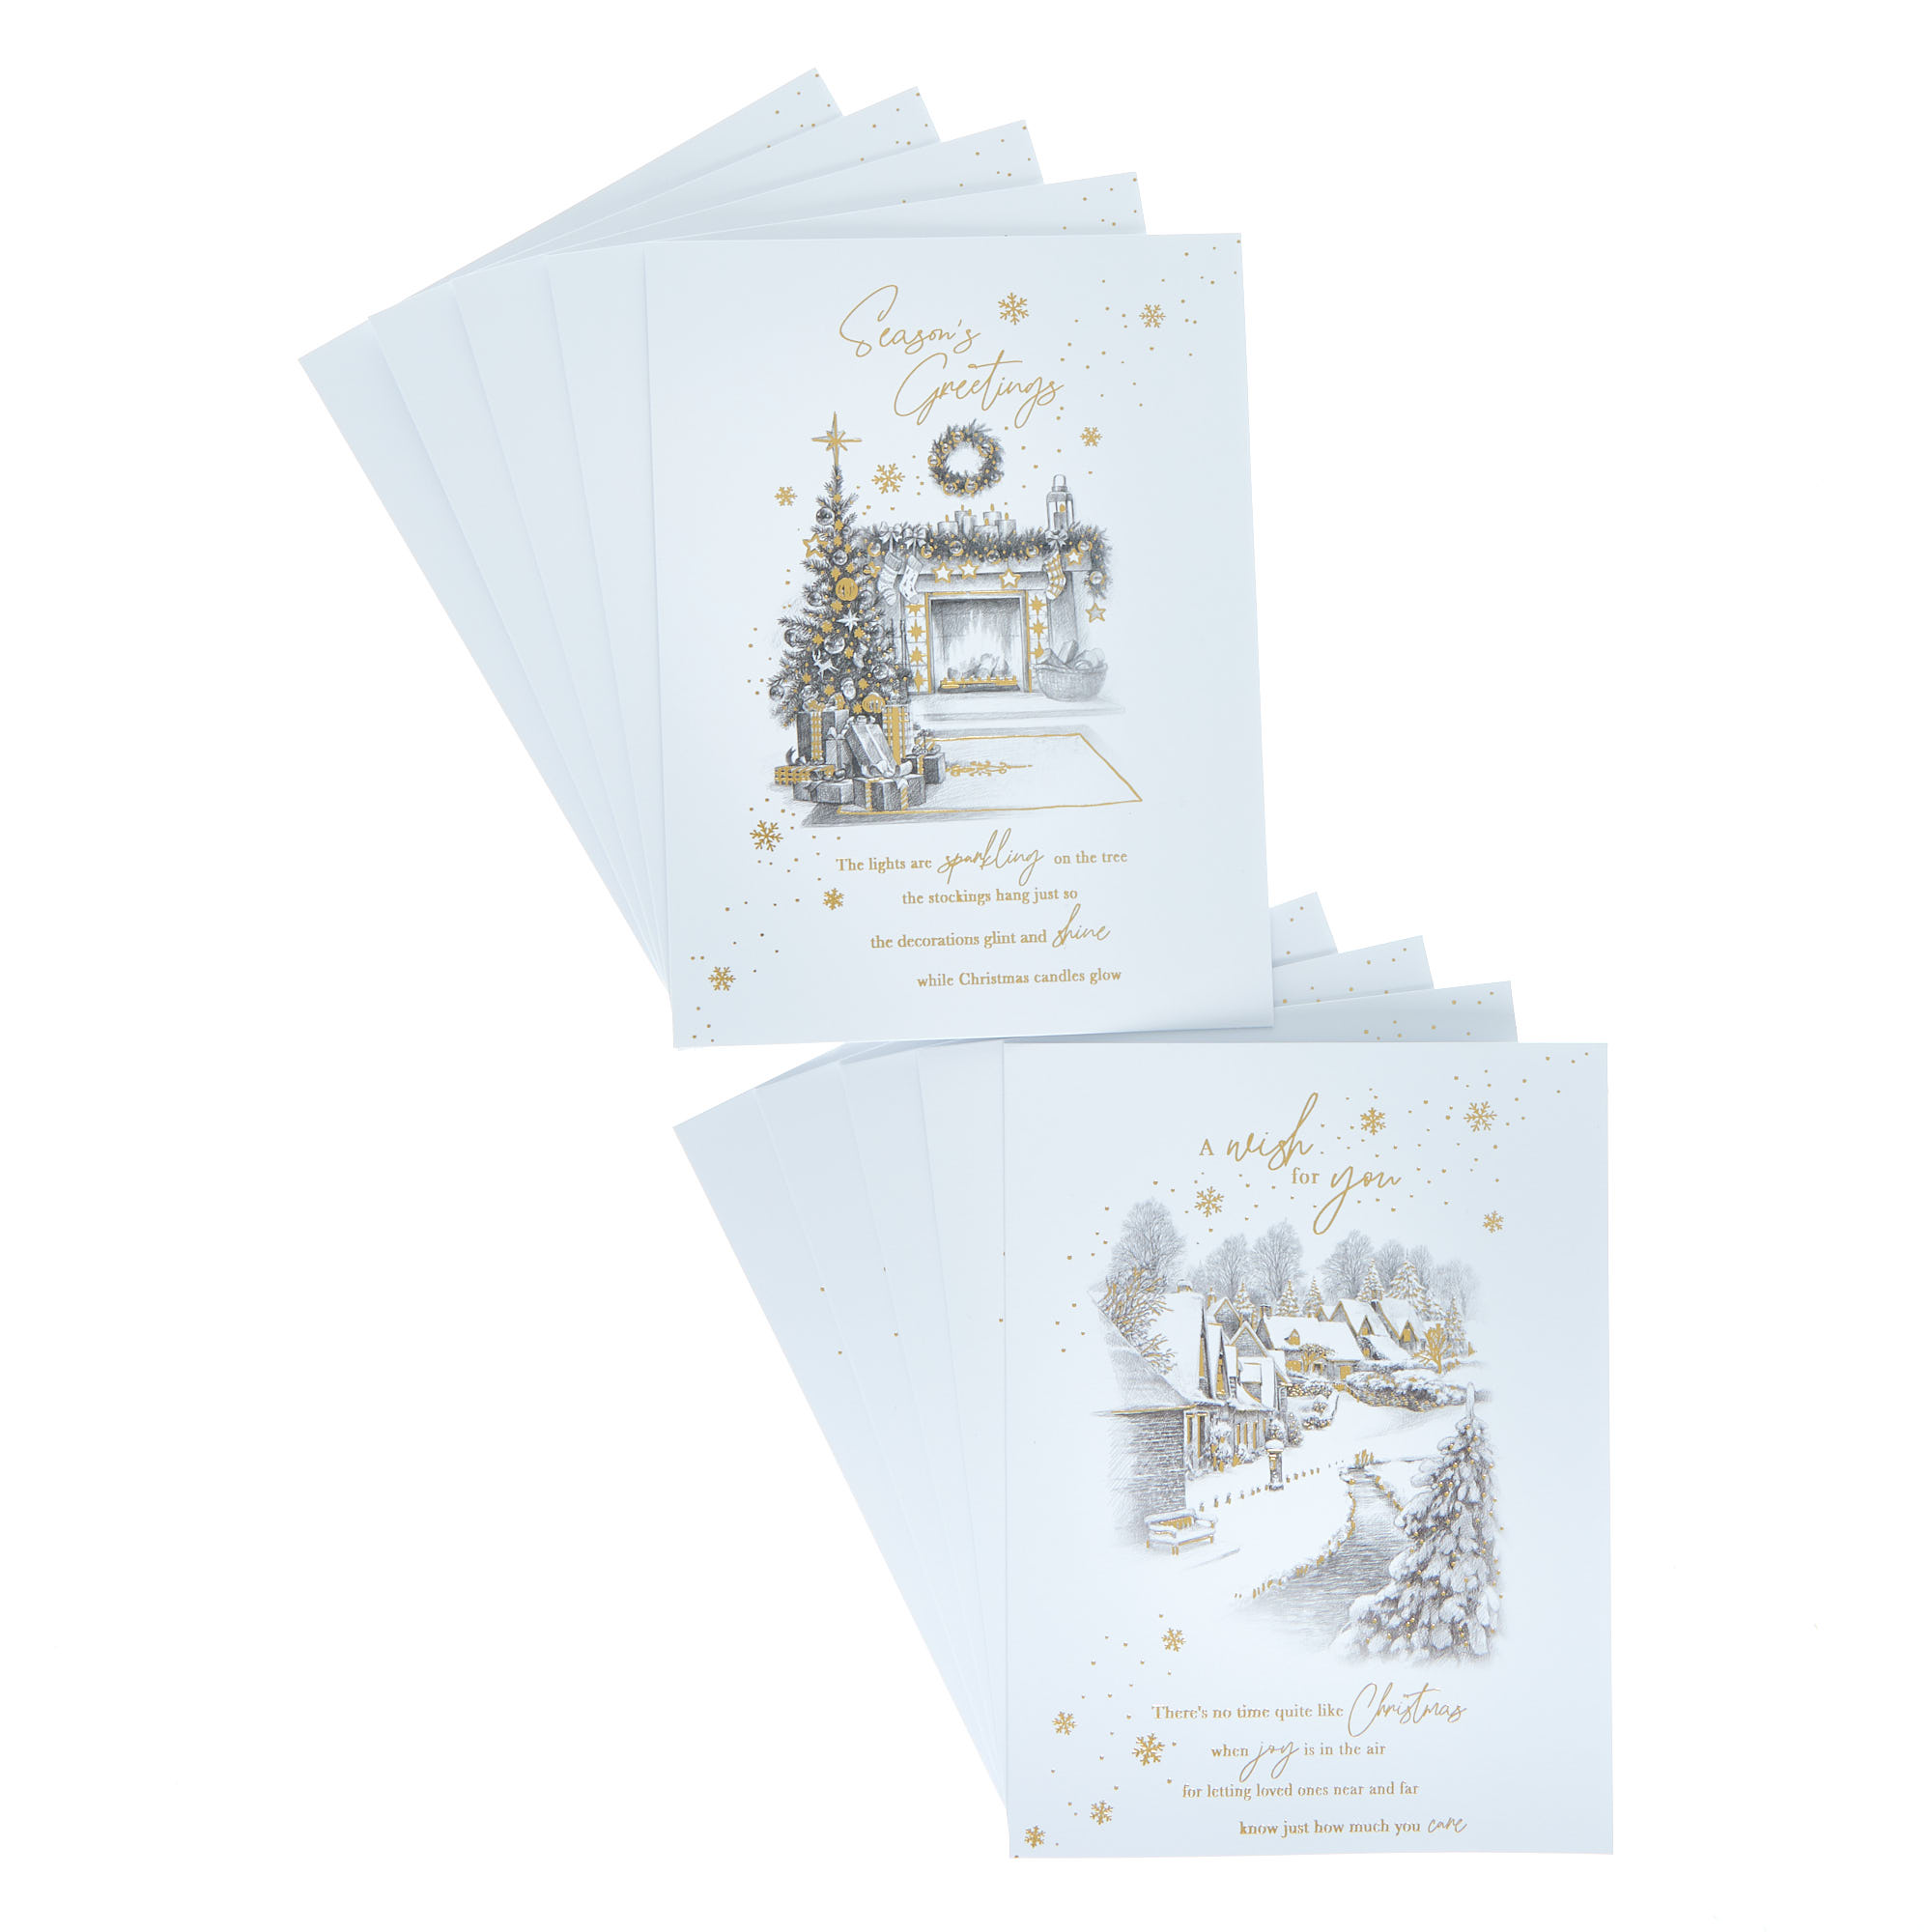 10 Deluxe Boxed Charity Christmas Cards - Classic Sketch (2 Designs)